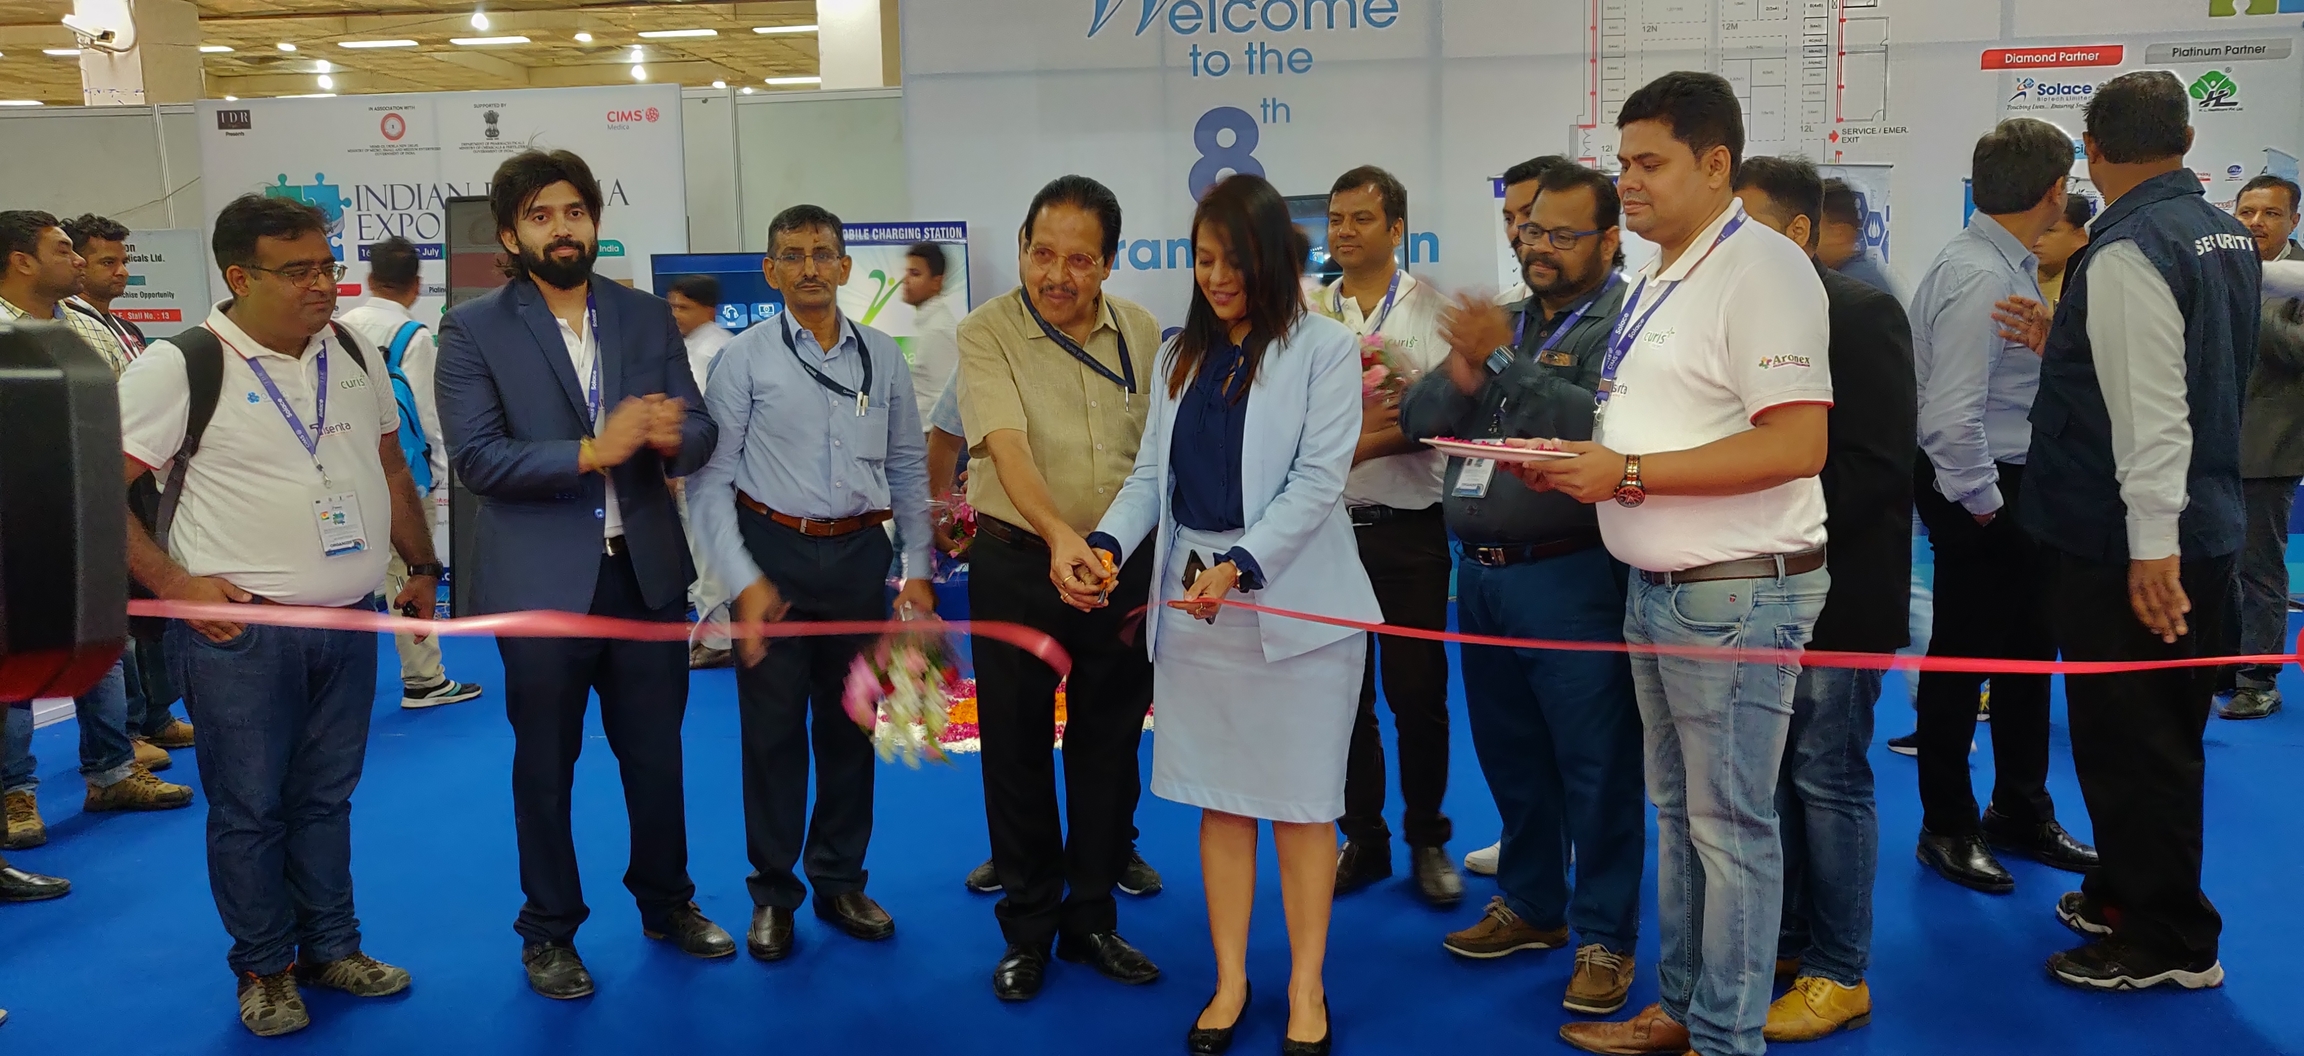 About 150 Pharma companies participating in Indian Media Expo 2019